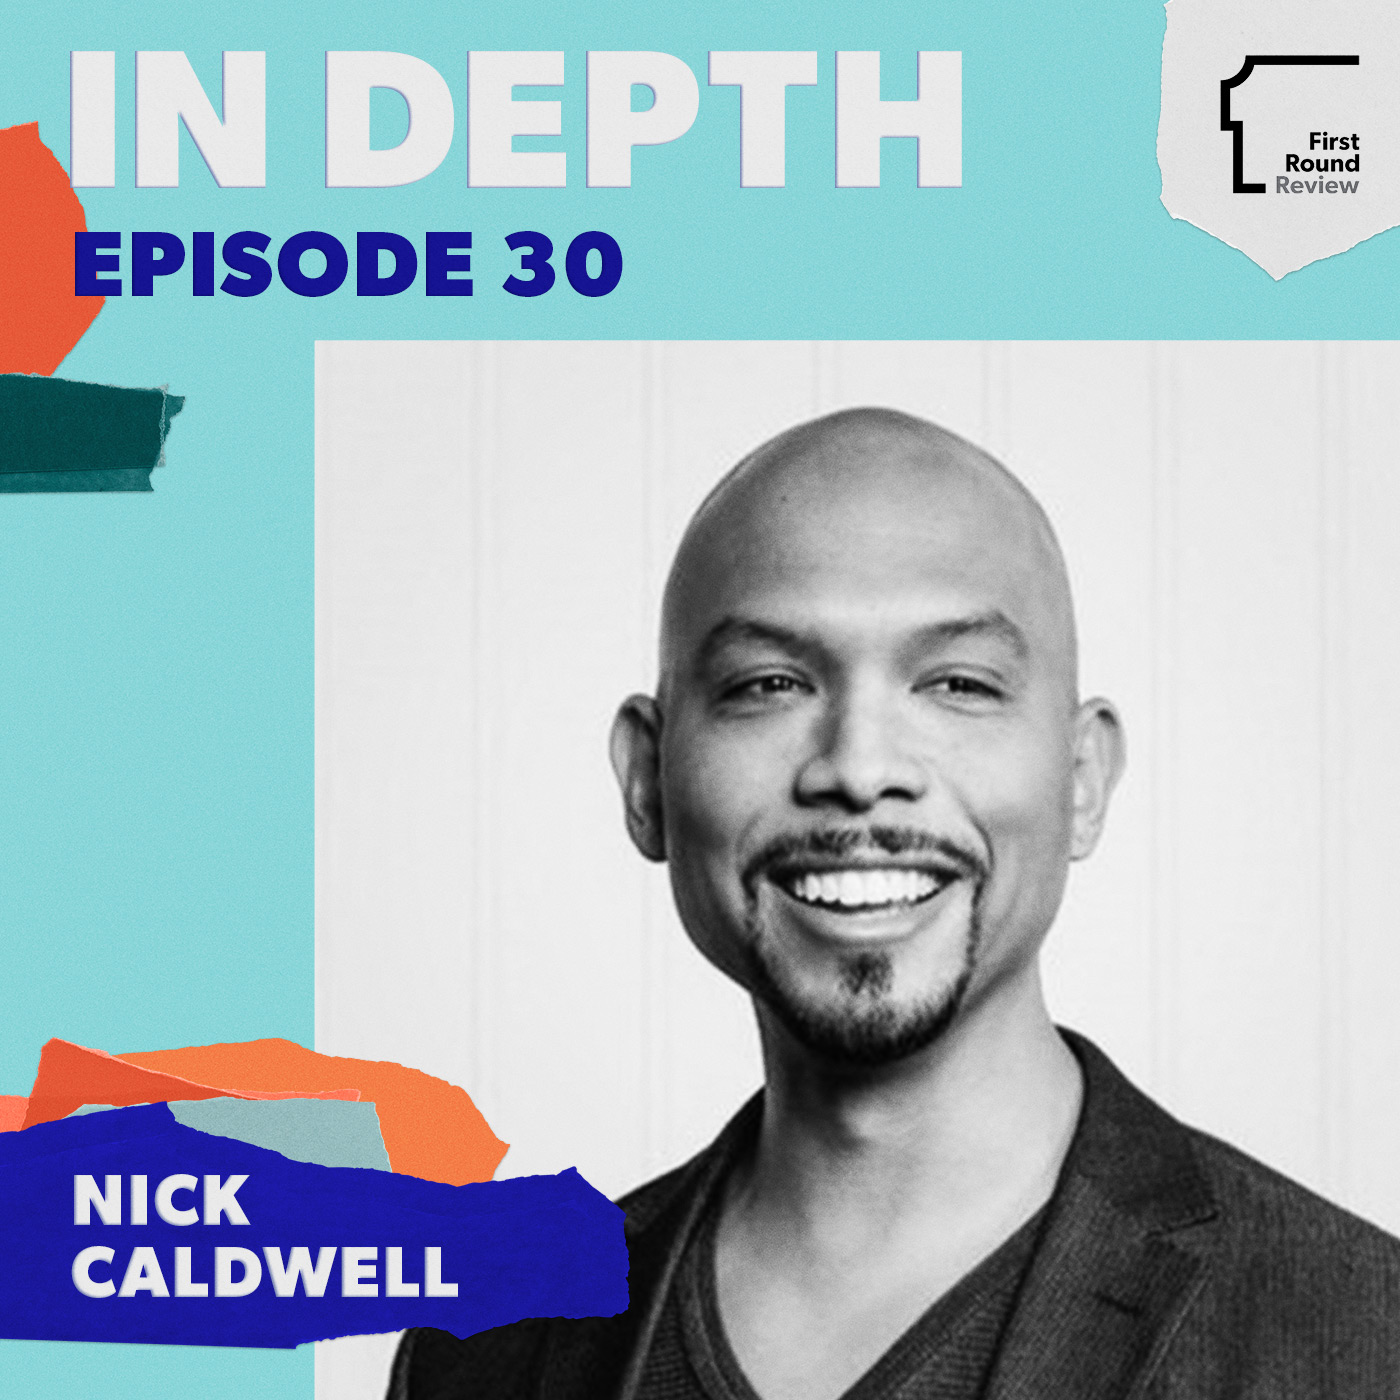 Nick Caldwell on the engineering cultures that power Microsoft, Reddit, Looker & Twitter